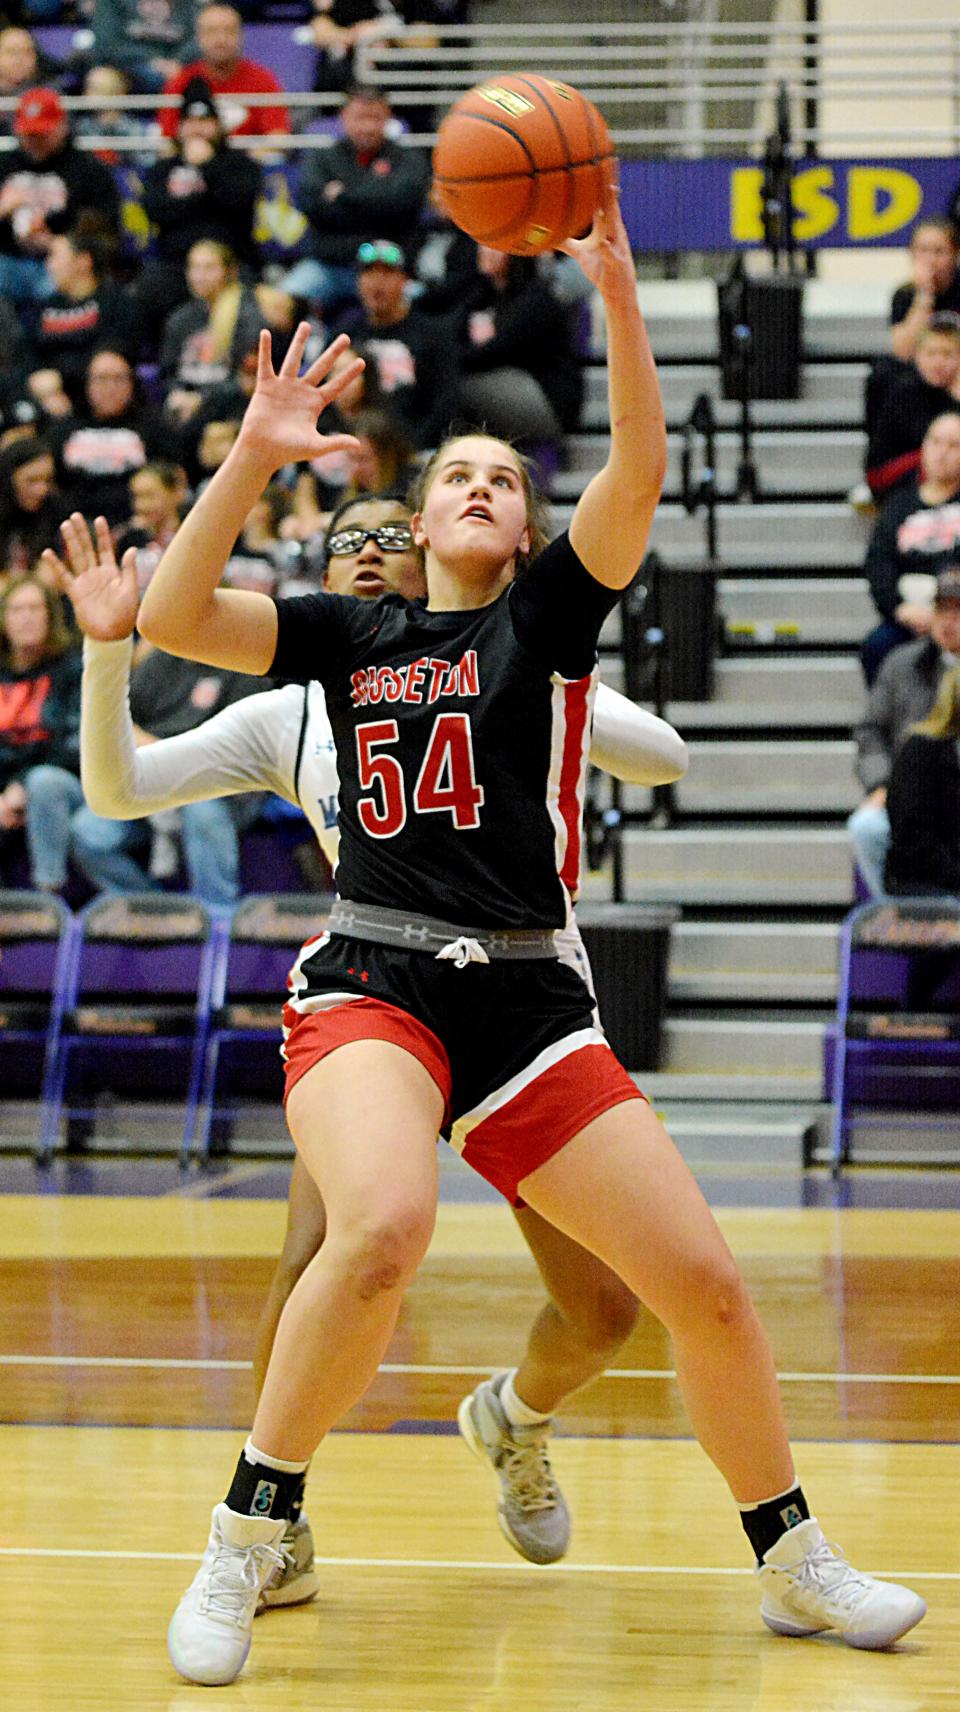 Sisseton's Krista Langager hauls in a pass against Red Cloud's Anjah Lamont during the third-place game of the state Class A girls basketball tournament on Saturday, March 11, 2023 in the Watertown Civic Arena.